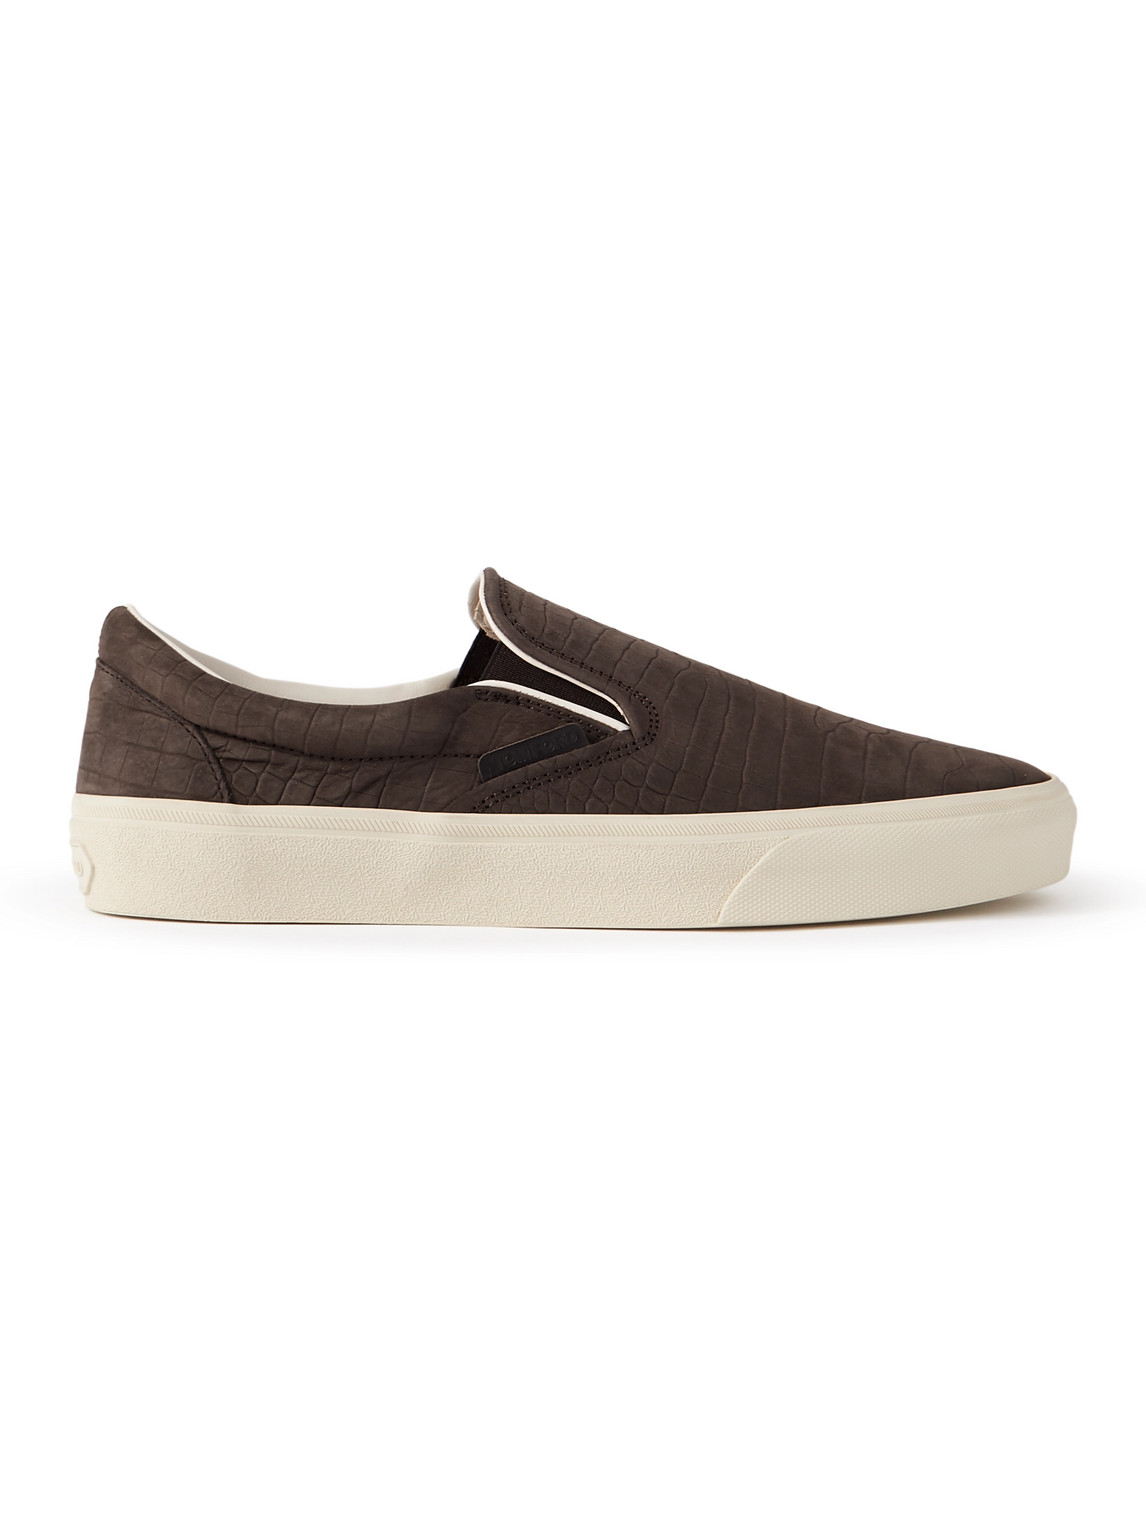 Tom Ford Brown Jude Slip-on Trainers